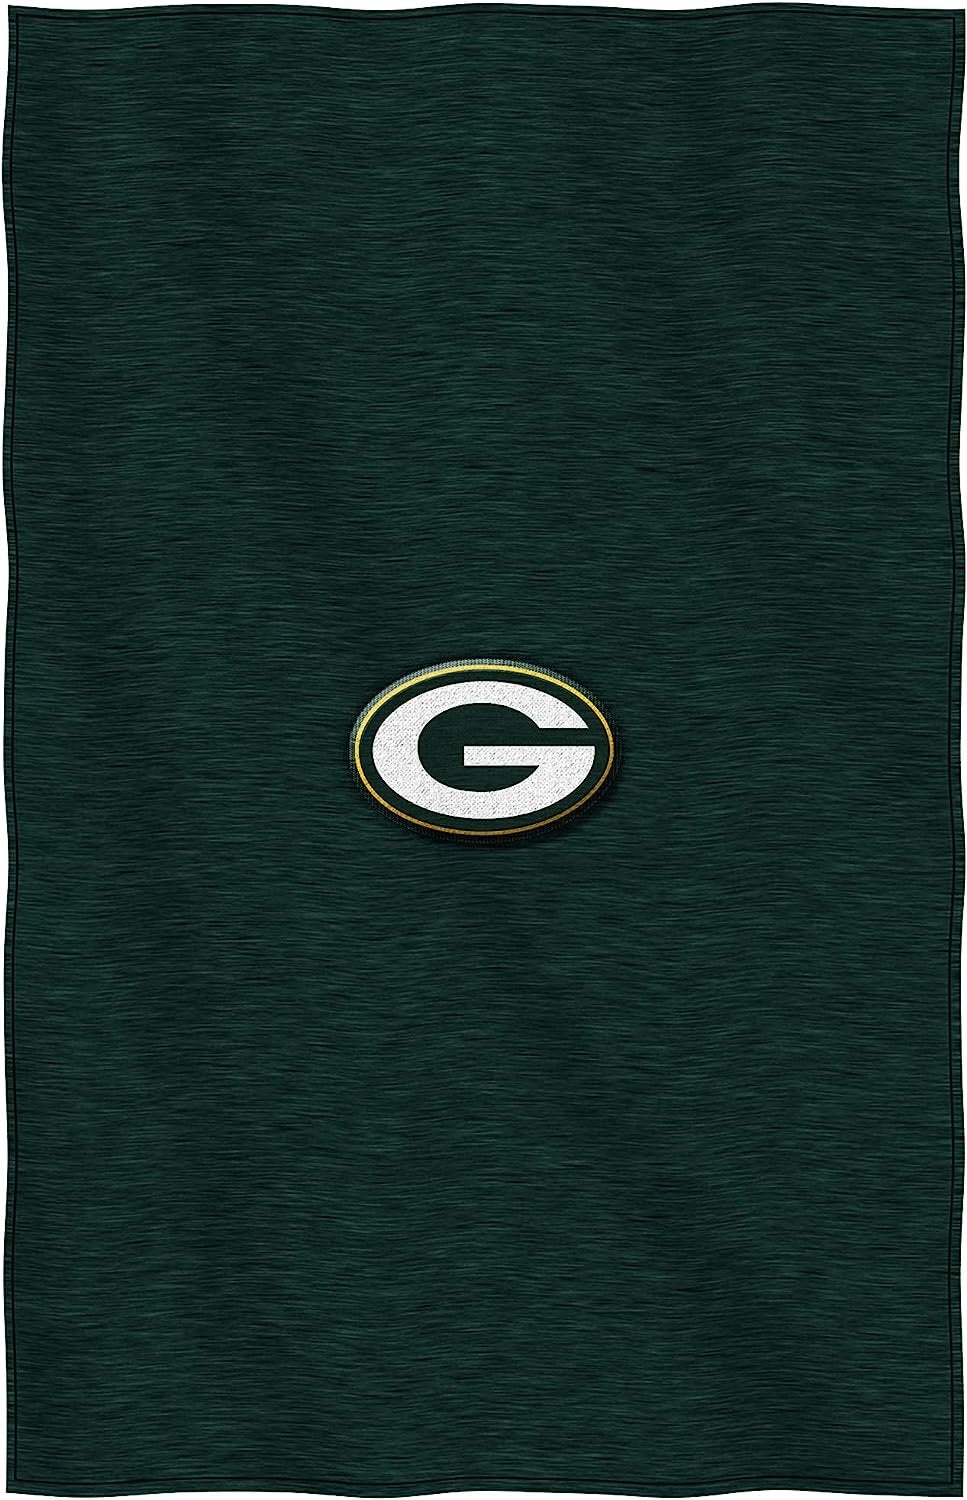 Green Bay Packers Throw Blanket, Sweatshirt Design, Embroidered Logo, Dominate Style, 54x84 Inch